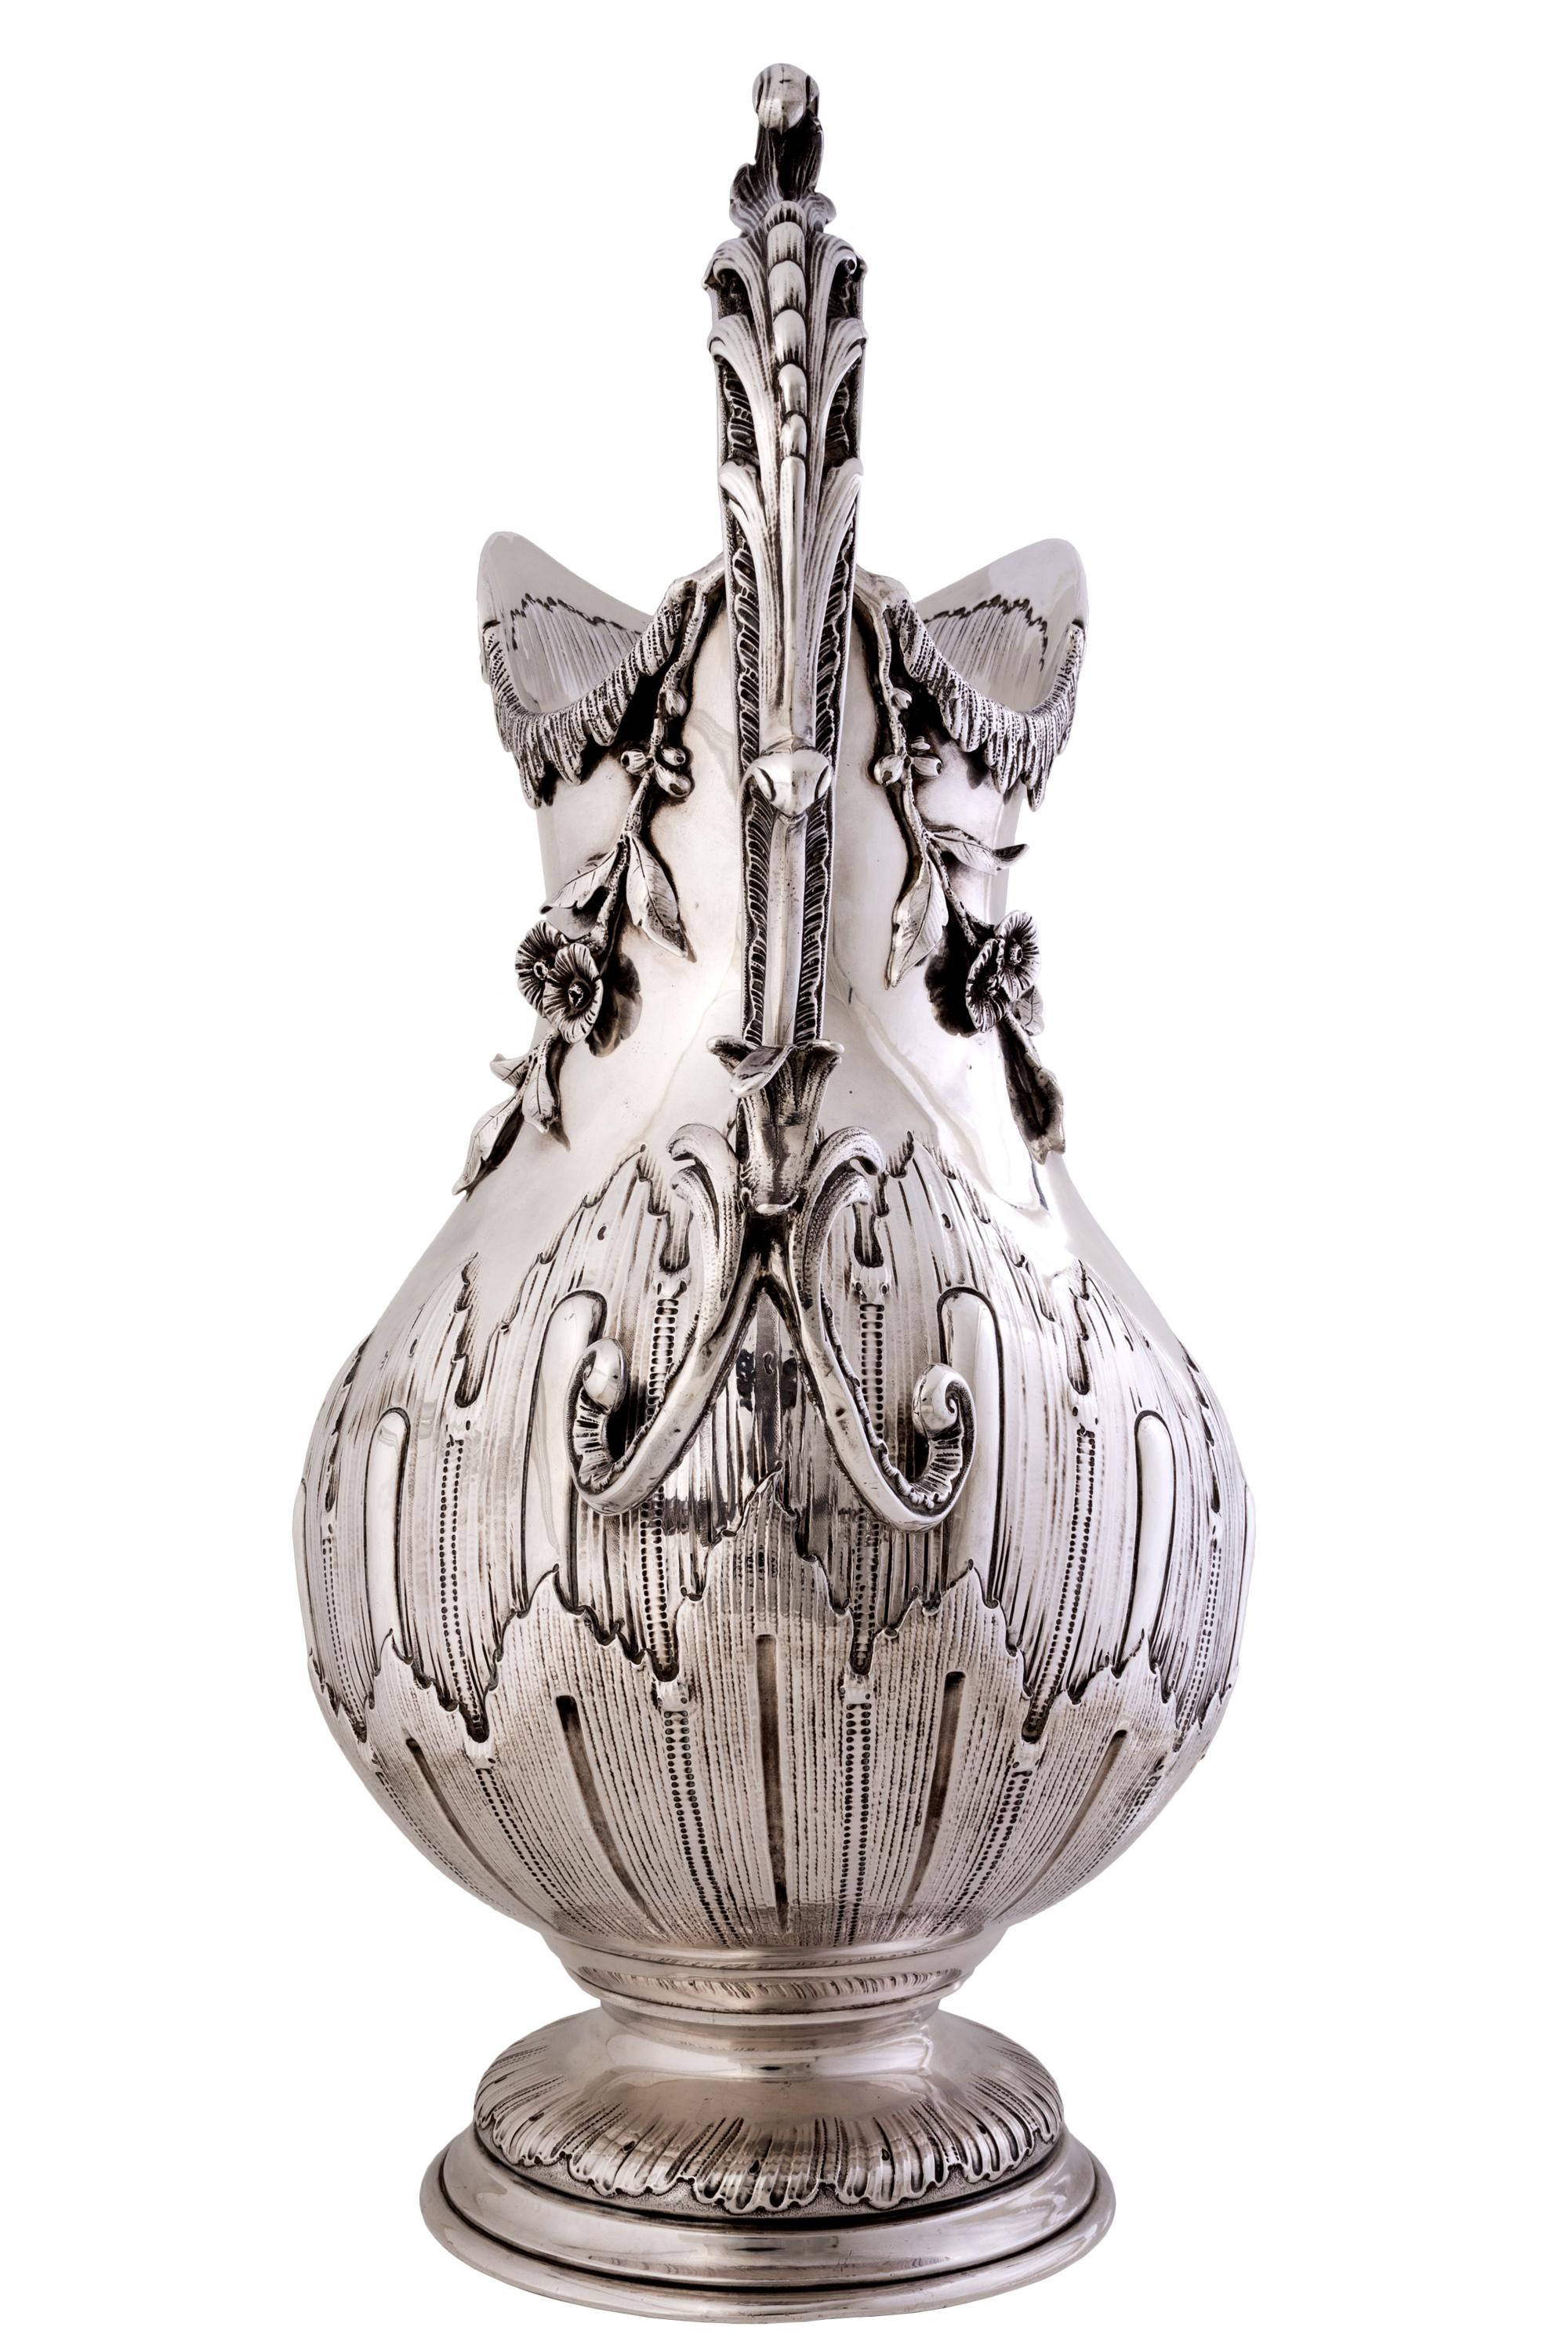 Rococo Revival Large Silver Water Pitcher with Sculptural Floral Detailing